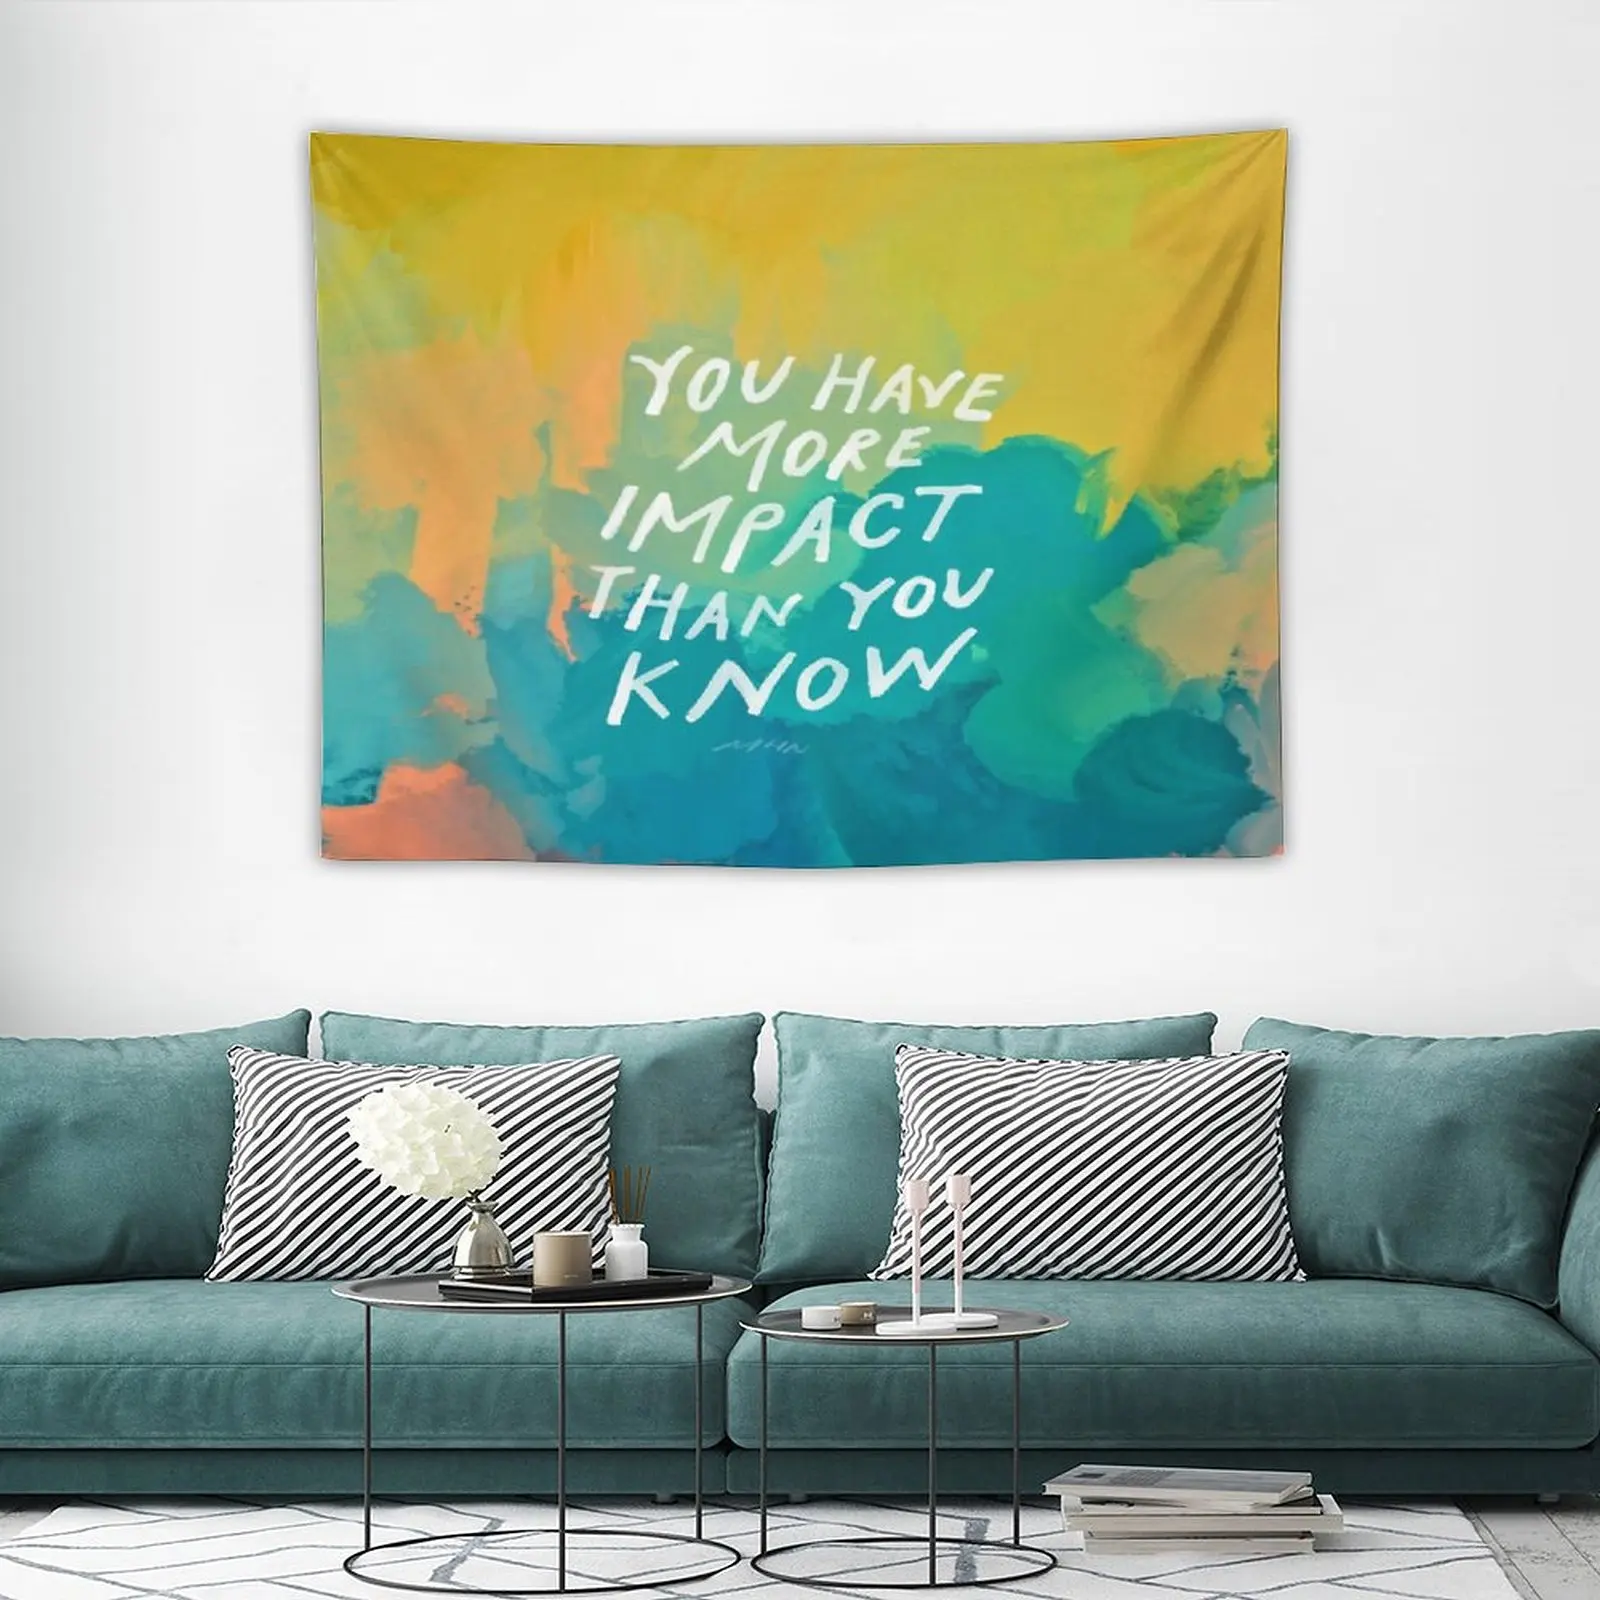 

Baphomet You Have More Impact Than You Know - Neon Abstract Colorful Art And Motivational Quote by Harper Nichols Tapestry Chri